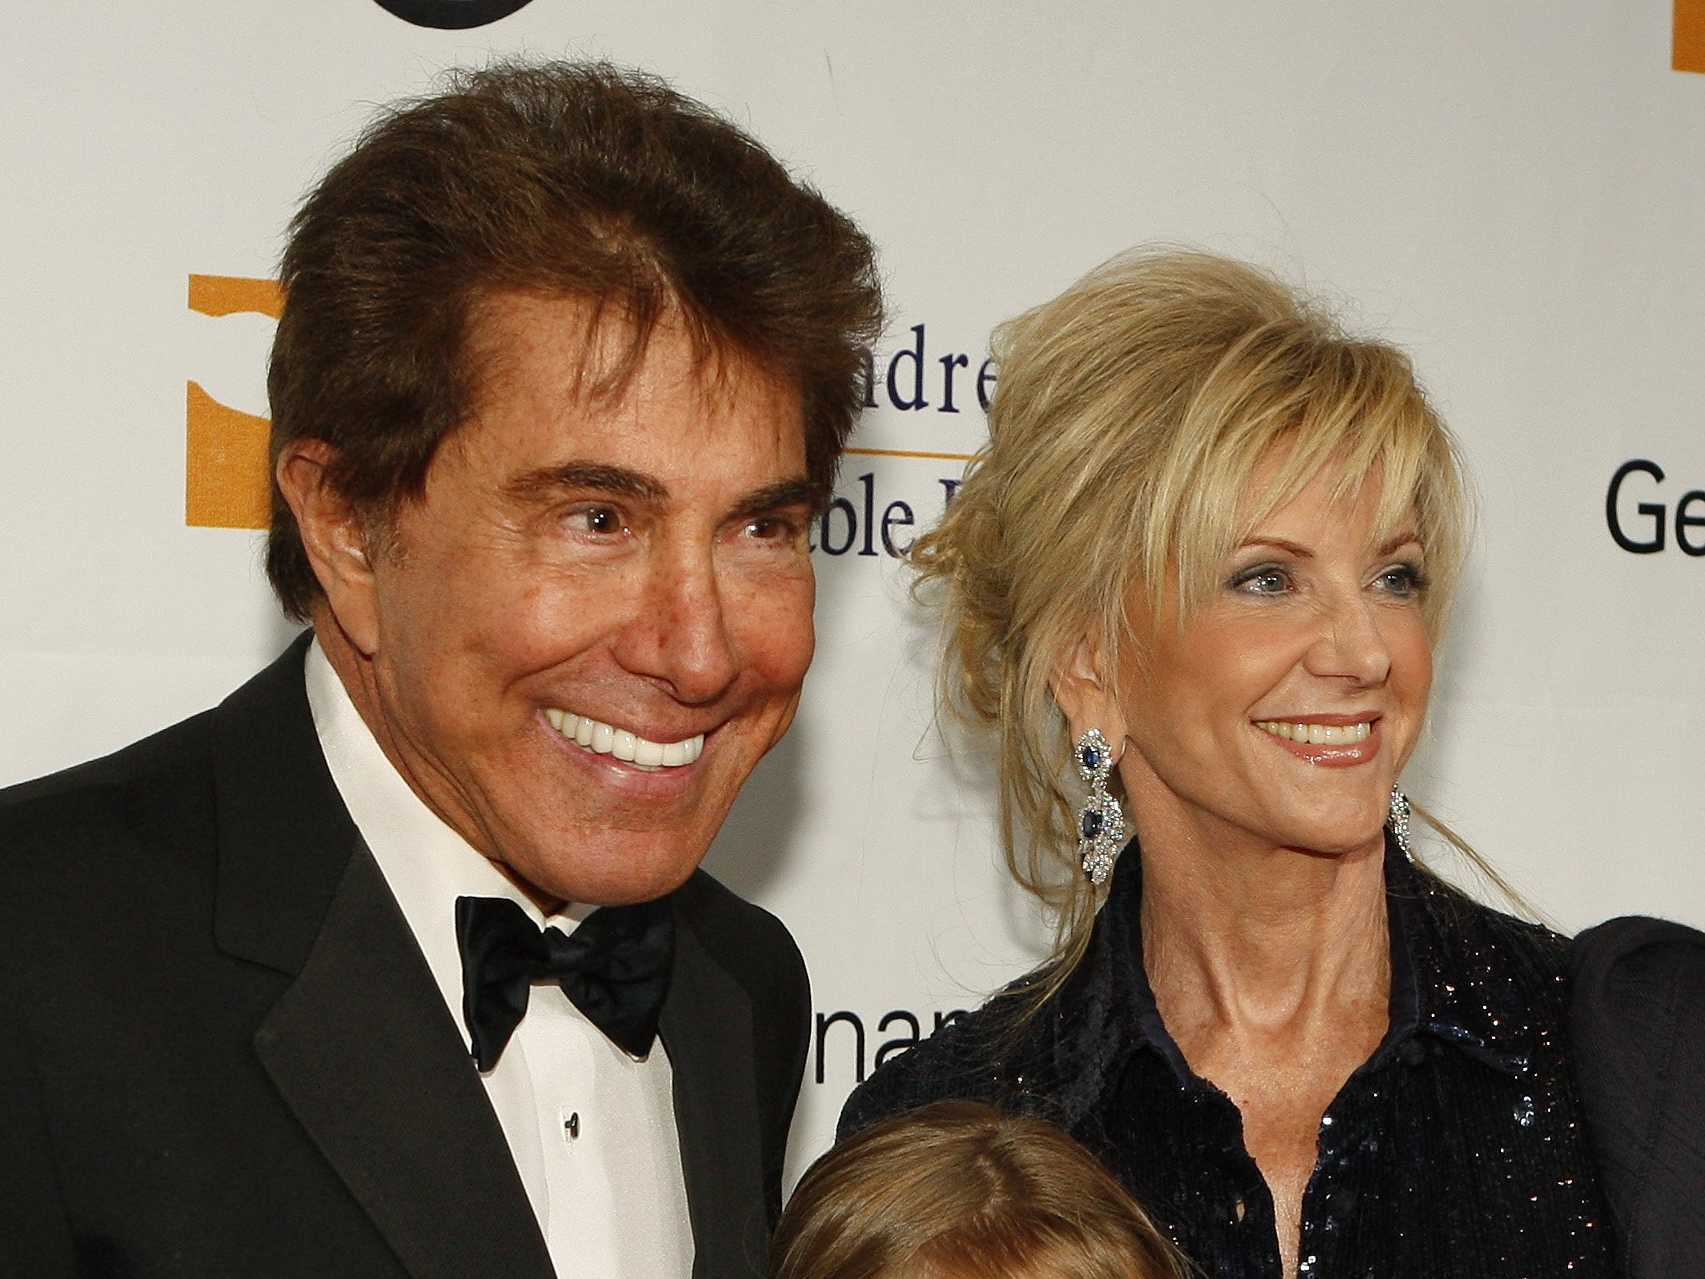 14 Most Expensive Divorces in the World